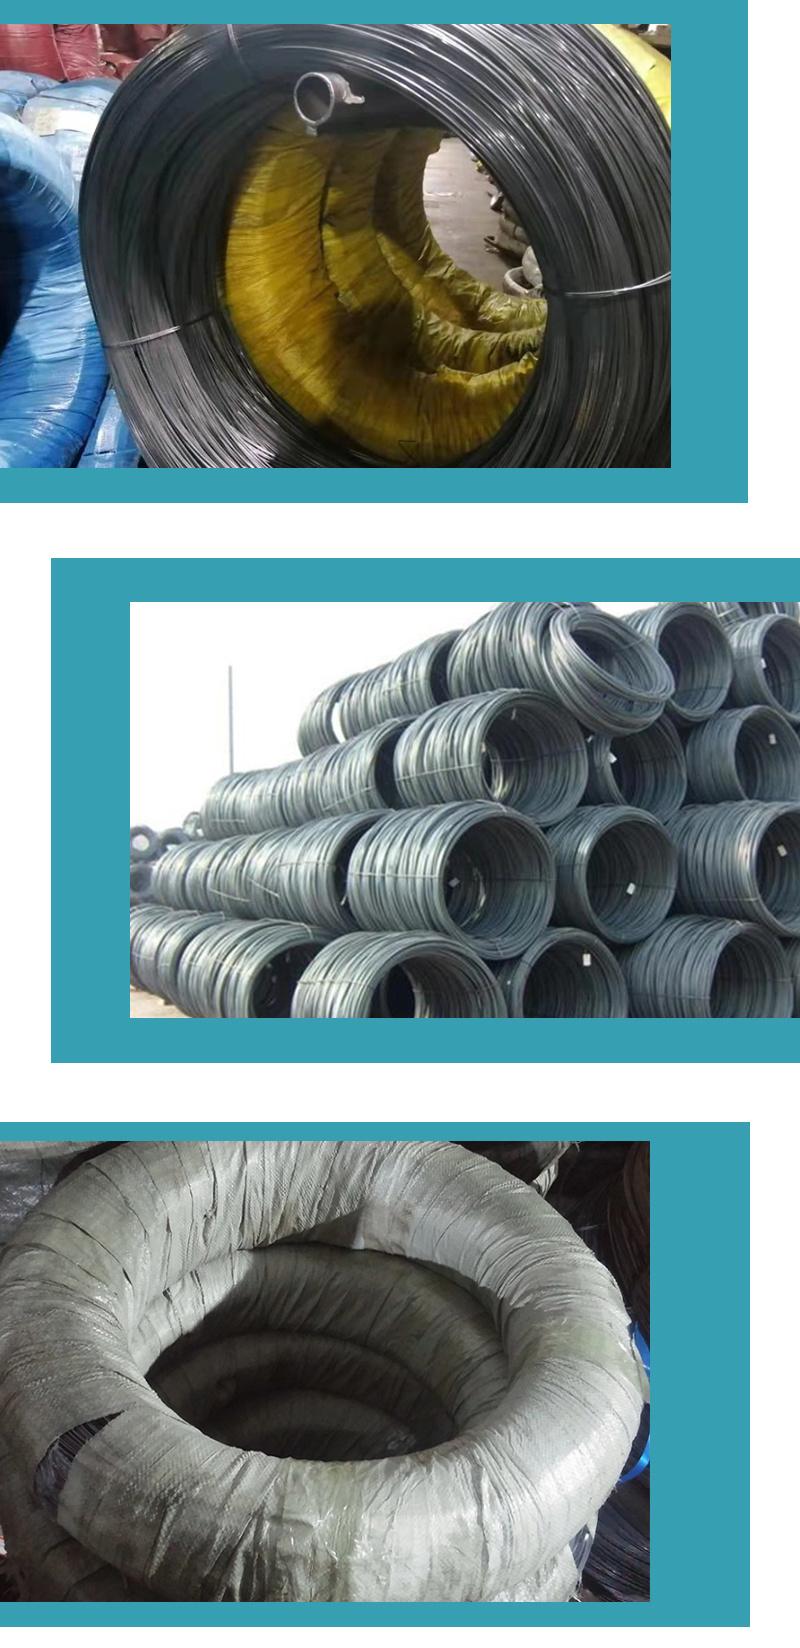 Wholesale Strength Steel Wire Used for Mattress Spring